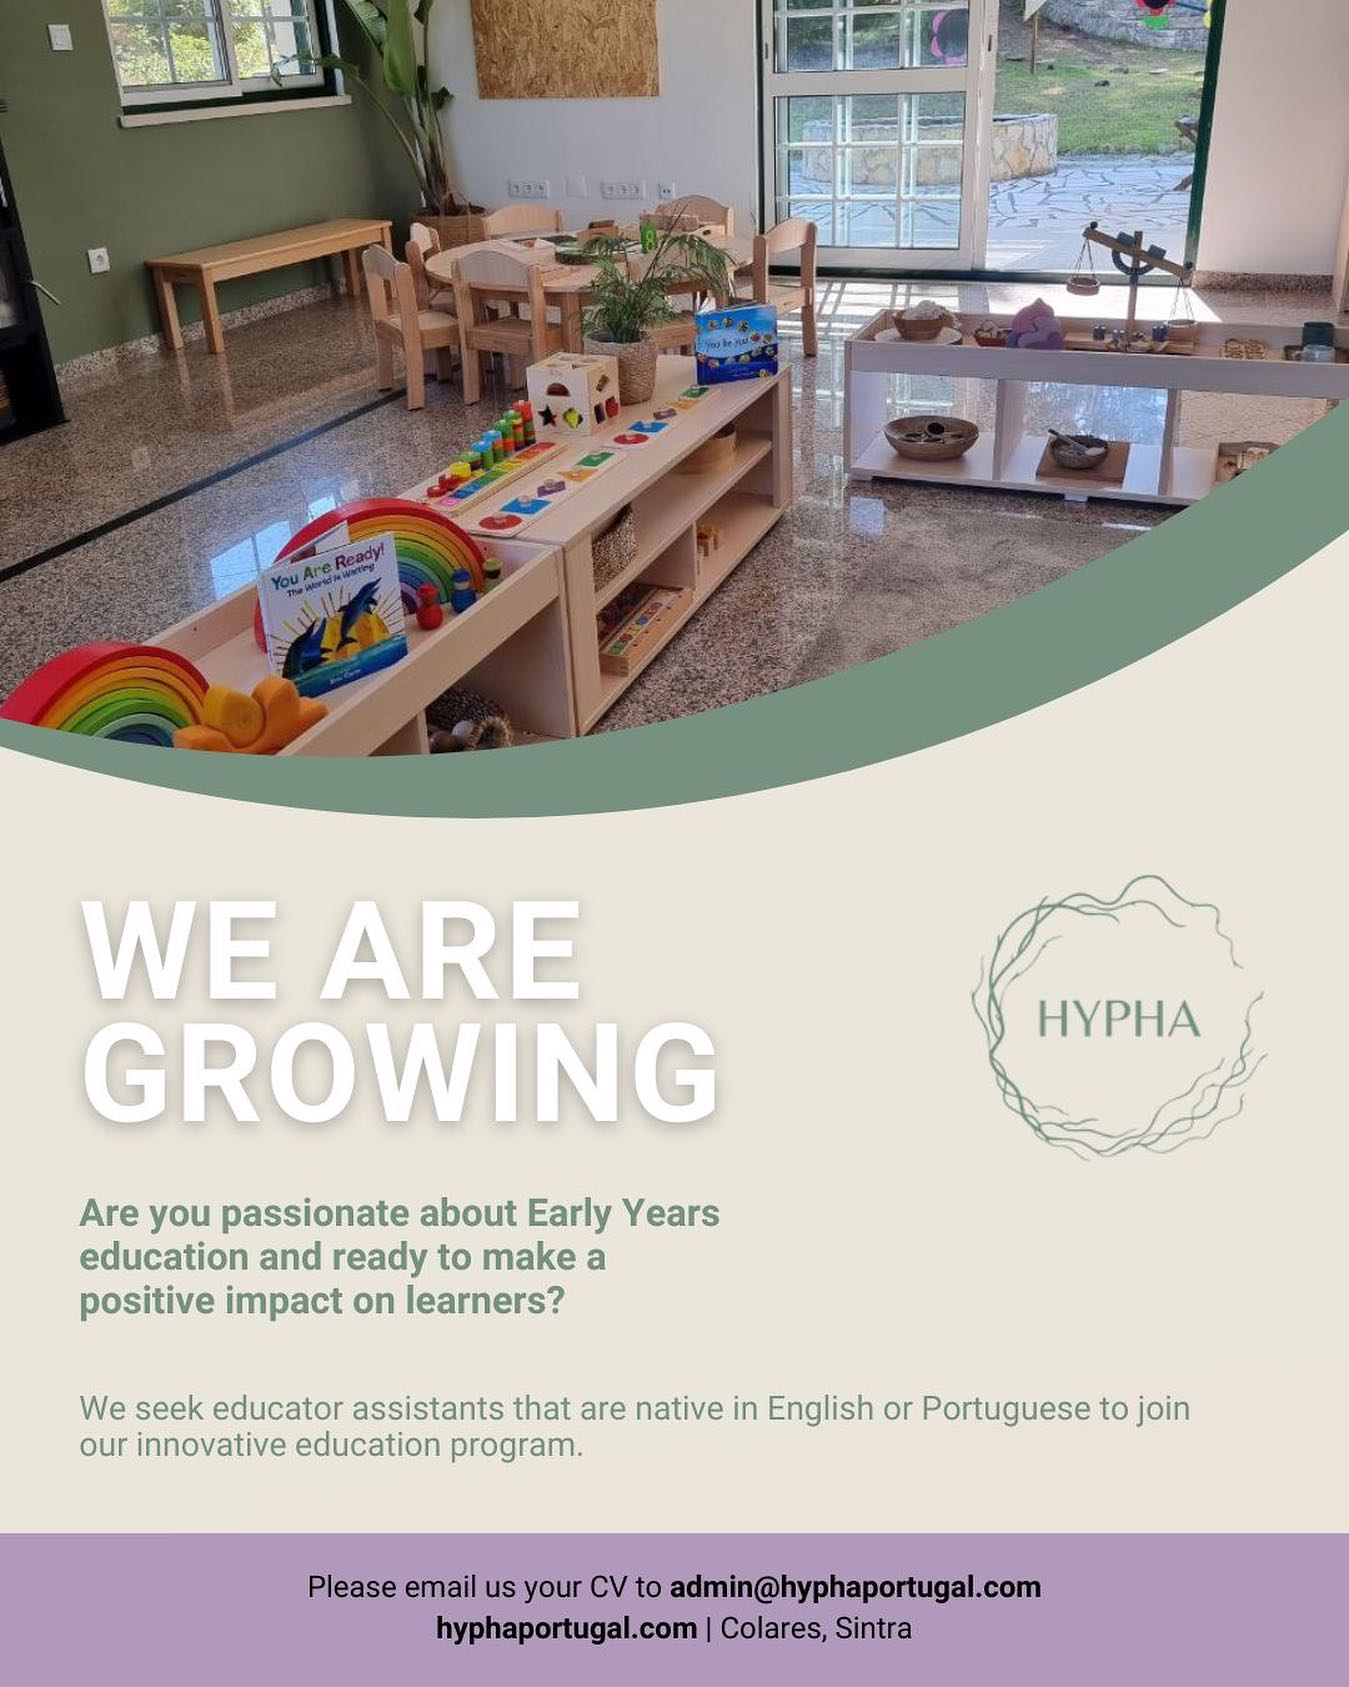 We are hiring! We seek educator assistants that are native in English or Portugu…